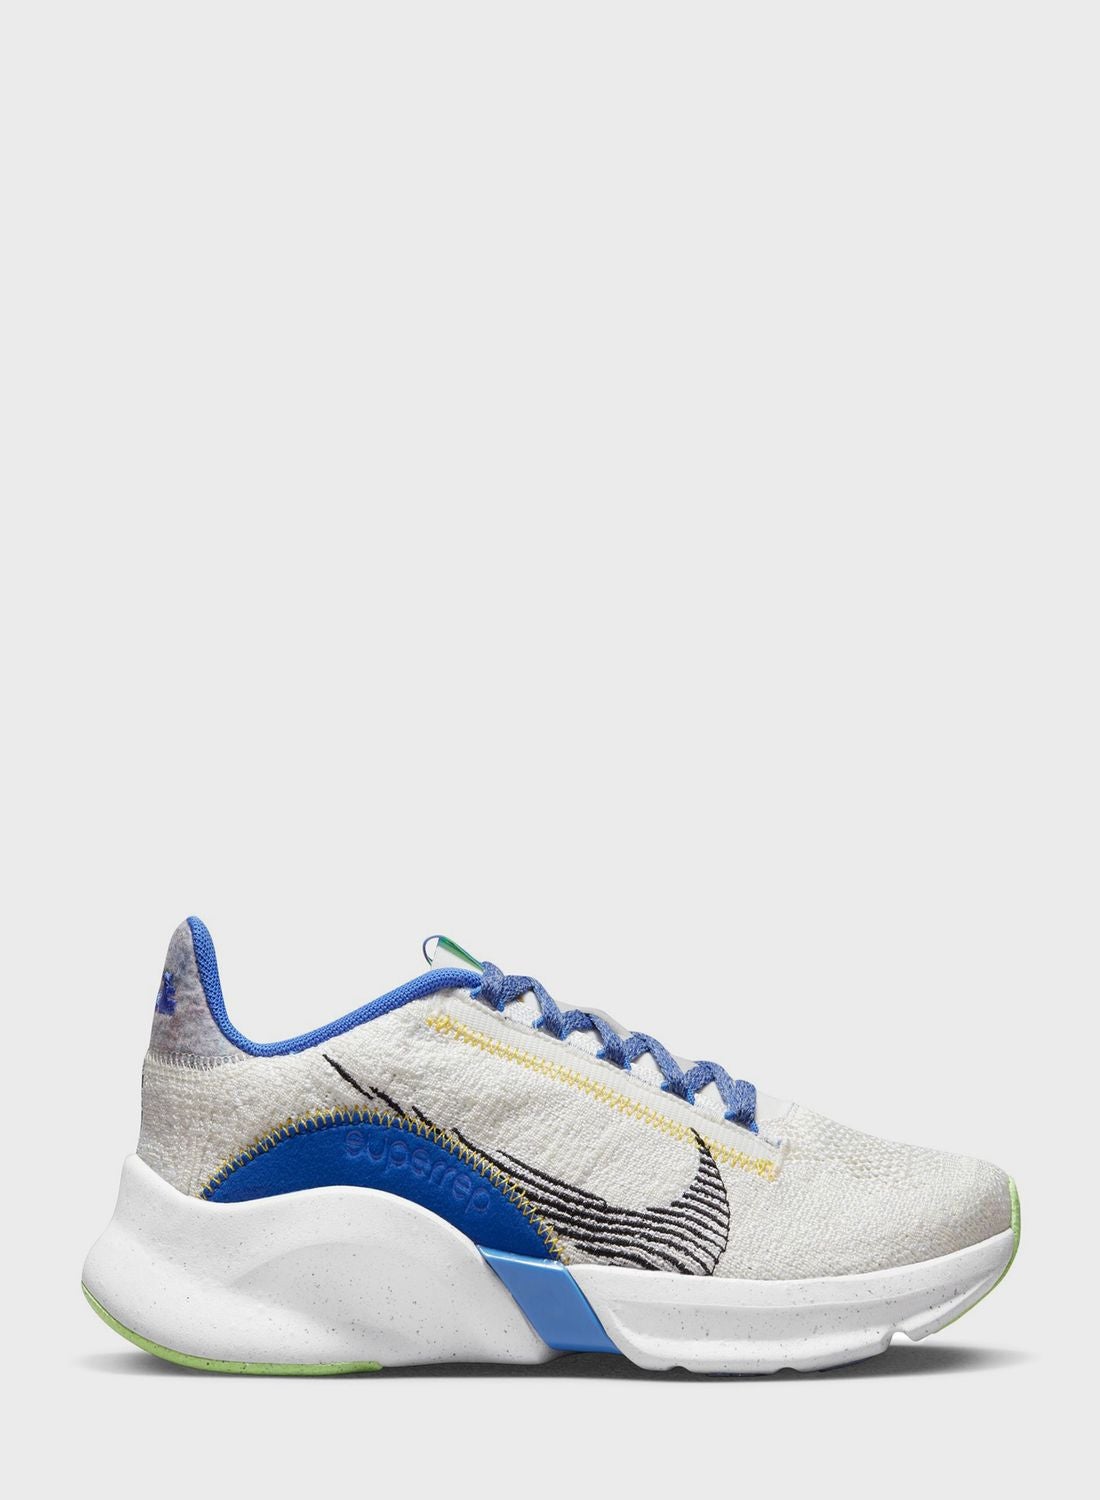 Uae online fashion store - **Nike shoes for sale *** **Size 40 to 45  Available** **Bigg sale for this shoes** **Price only 79AED ** #For #Order  #Use #Massenger #For #WhatsApp $Click #here👇 https://wa.me/971562804473 |  Facebook